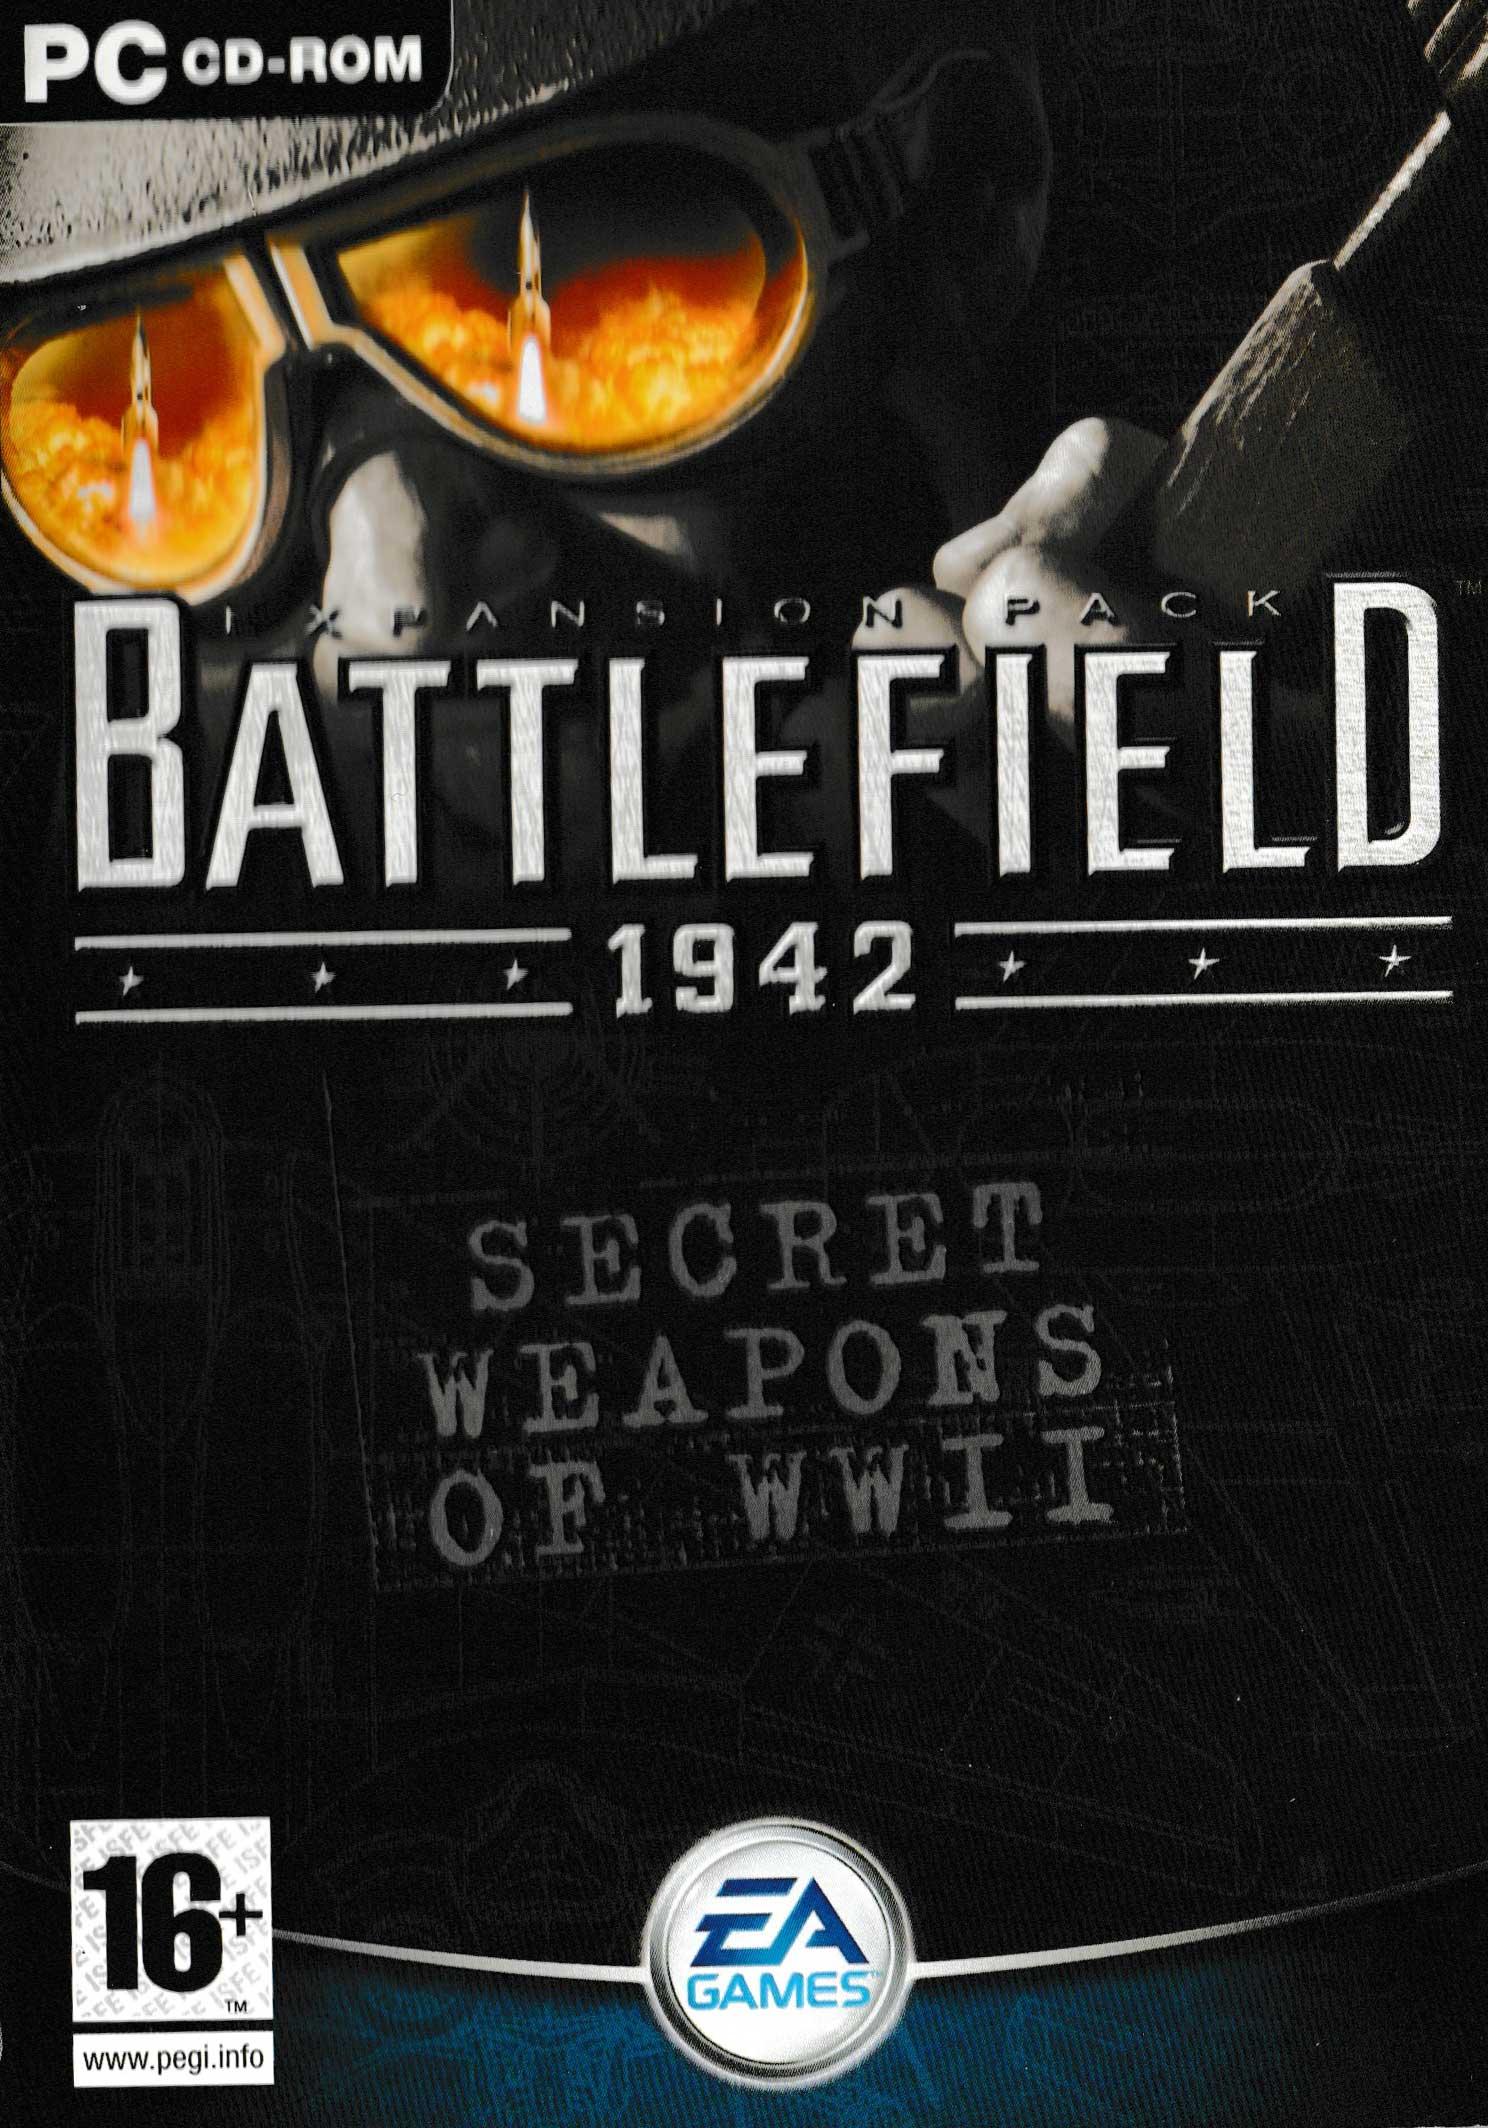 Battlefield 1942 Secret Weapons Of WWII - Classic Windows PC Game